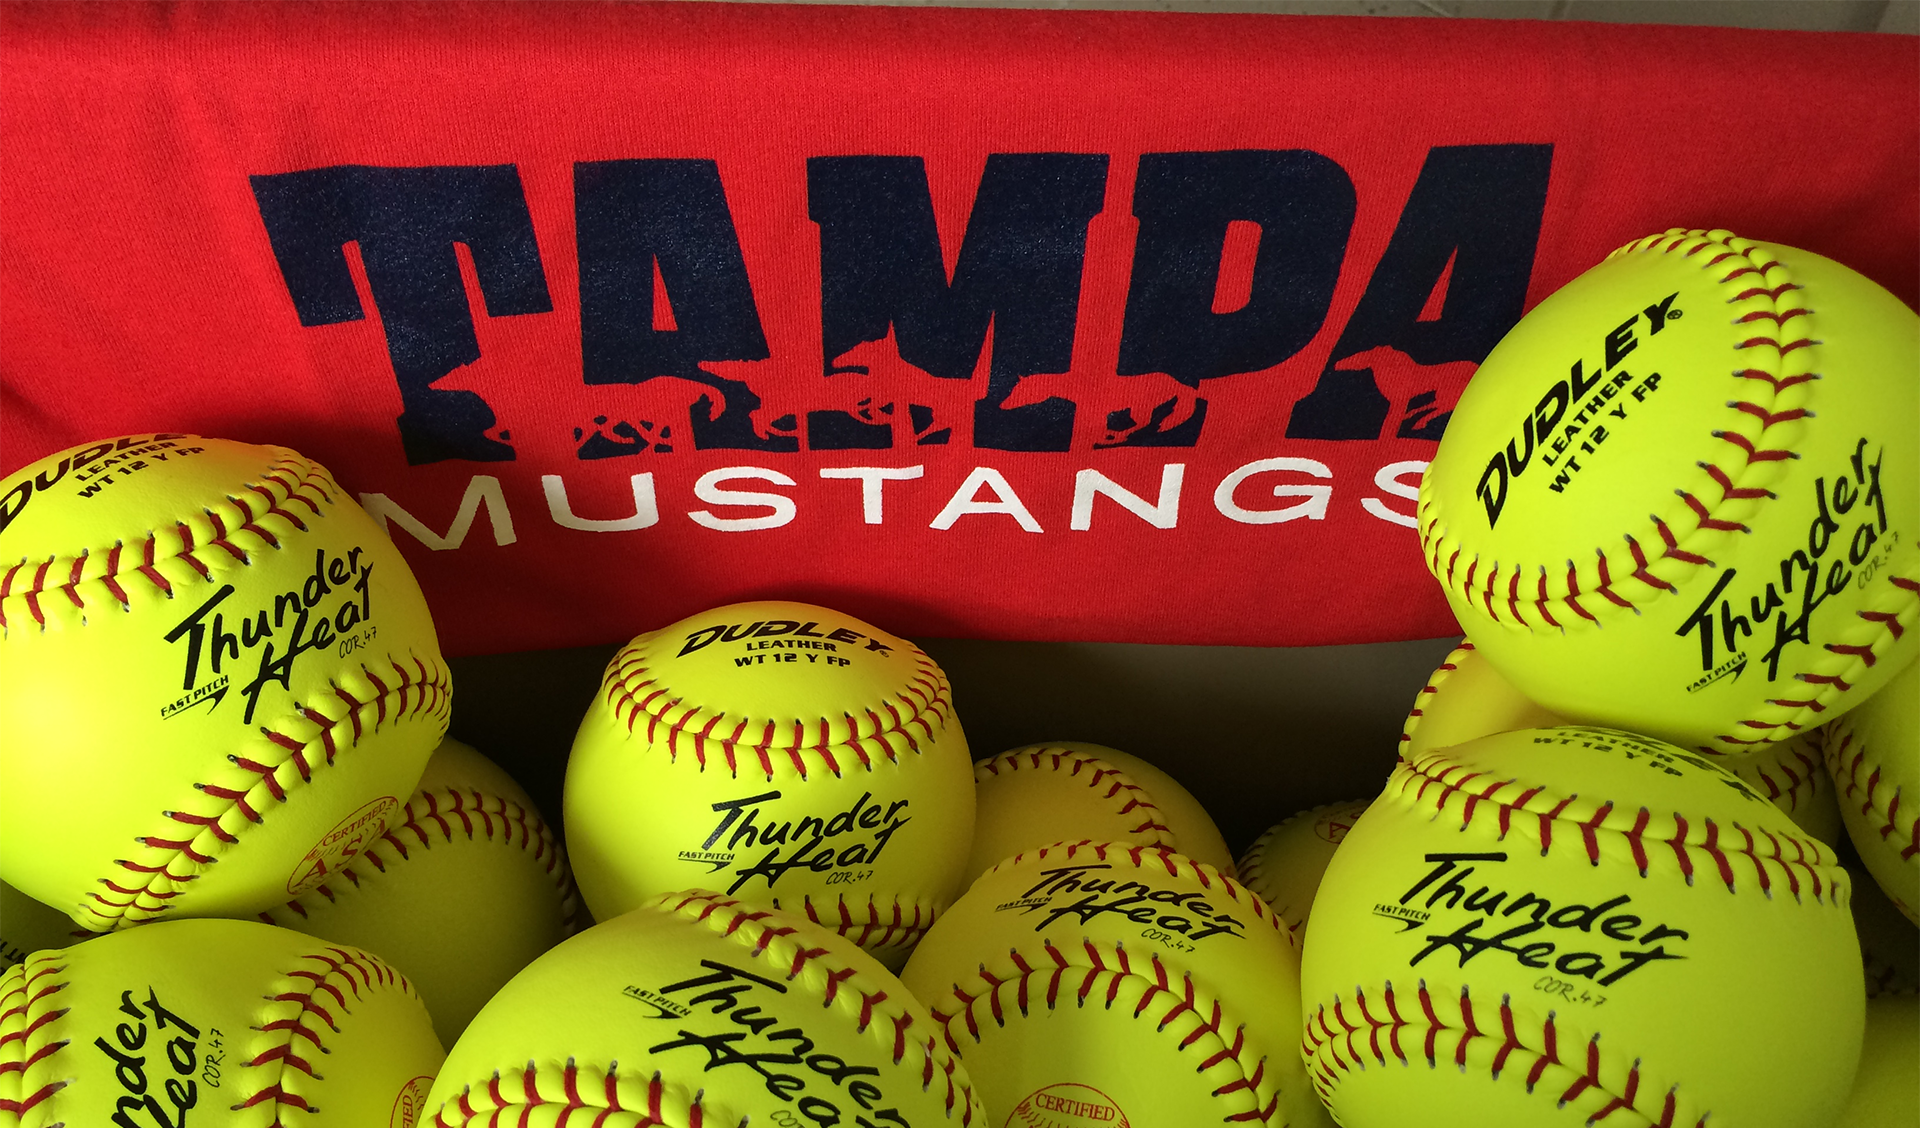 These are recent articles from the Tampa Tribune Sports section concerning the Mustangs teams and two Palm harbor University High softball standouts who play for the Tampa Mustangs 18u travel team and….